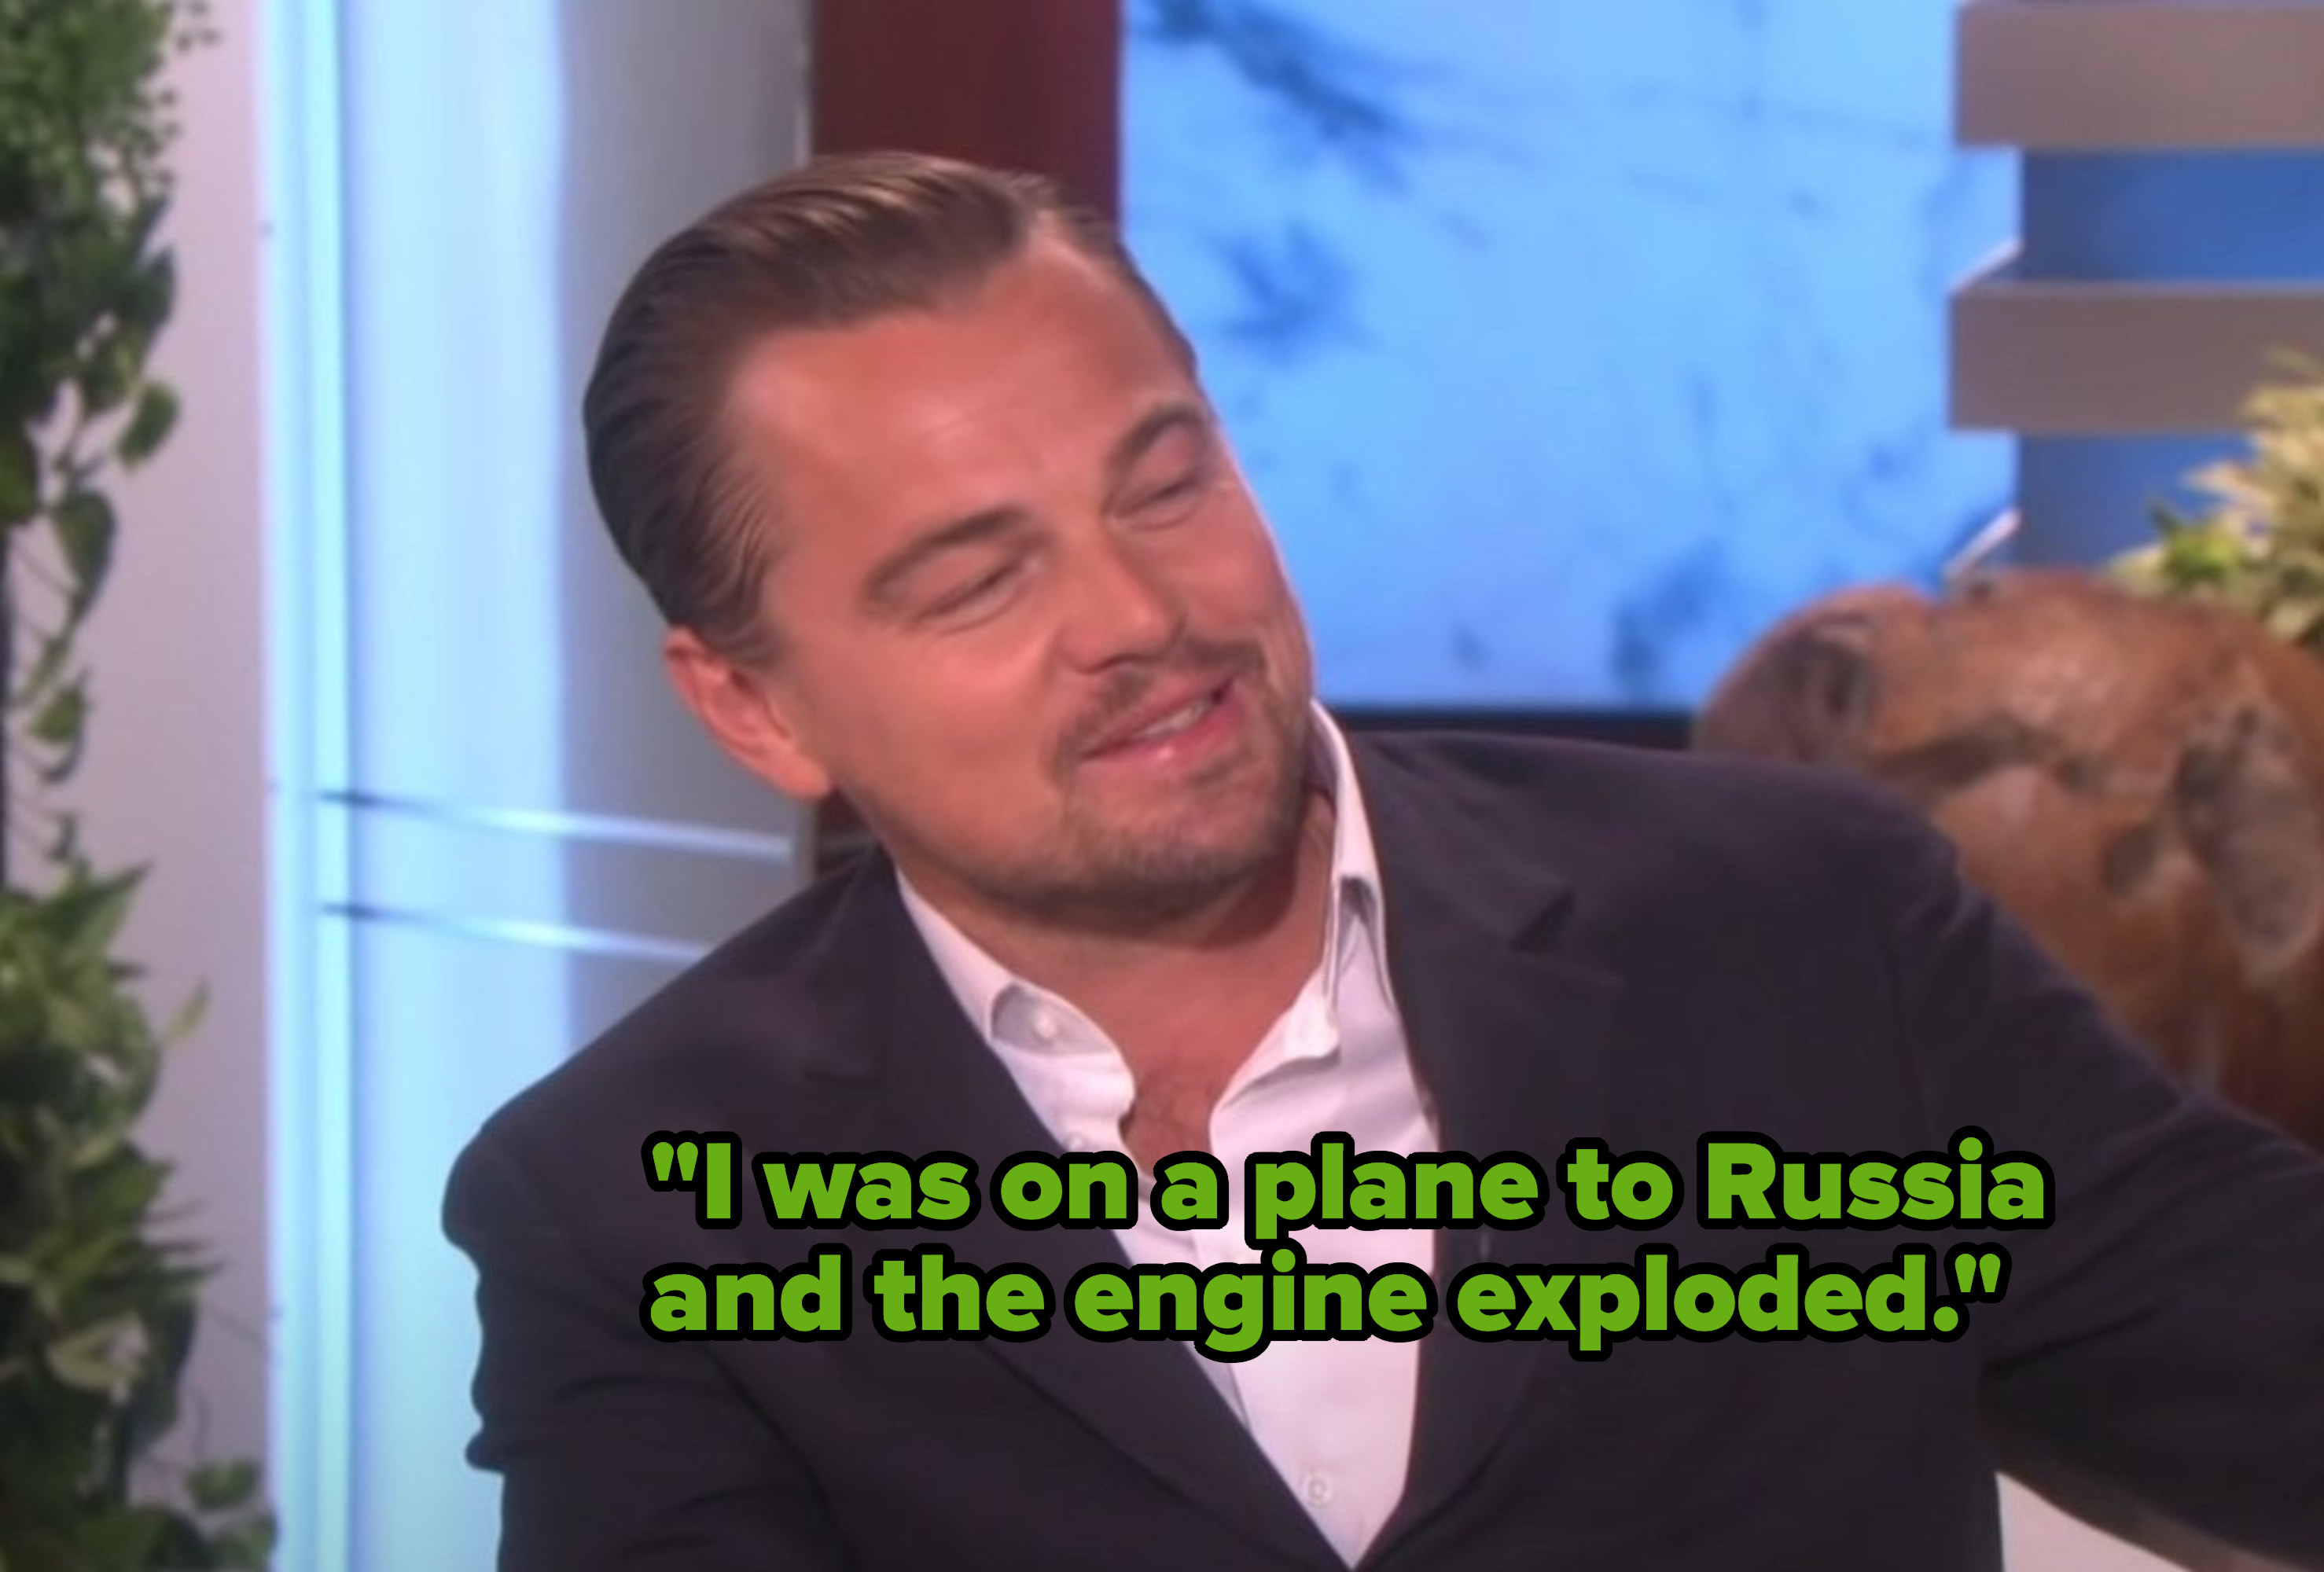 Leonardo DiCaprio talks about a dangerous plane experience he once went through on his way to Russia